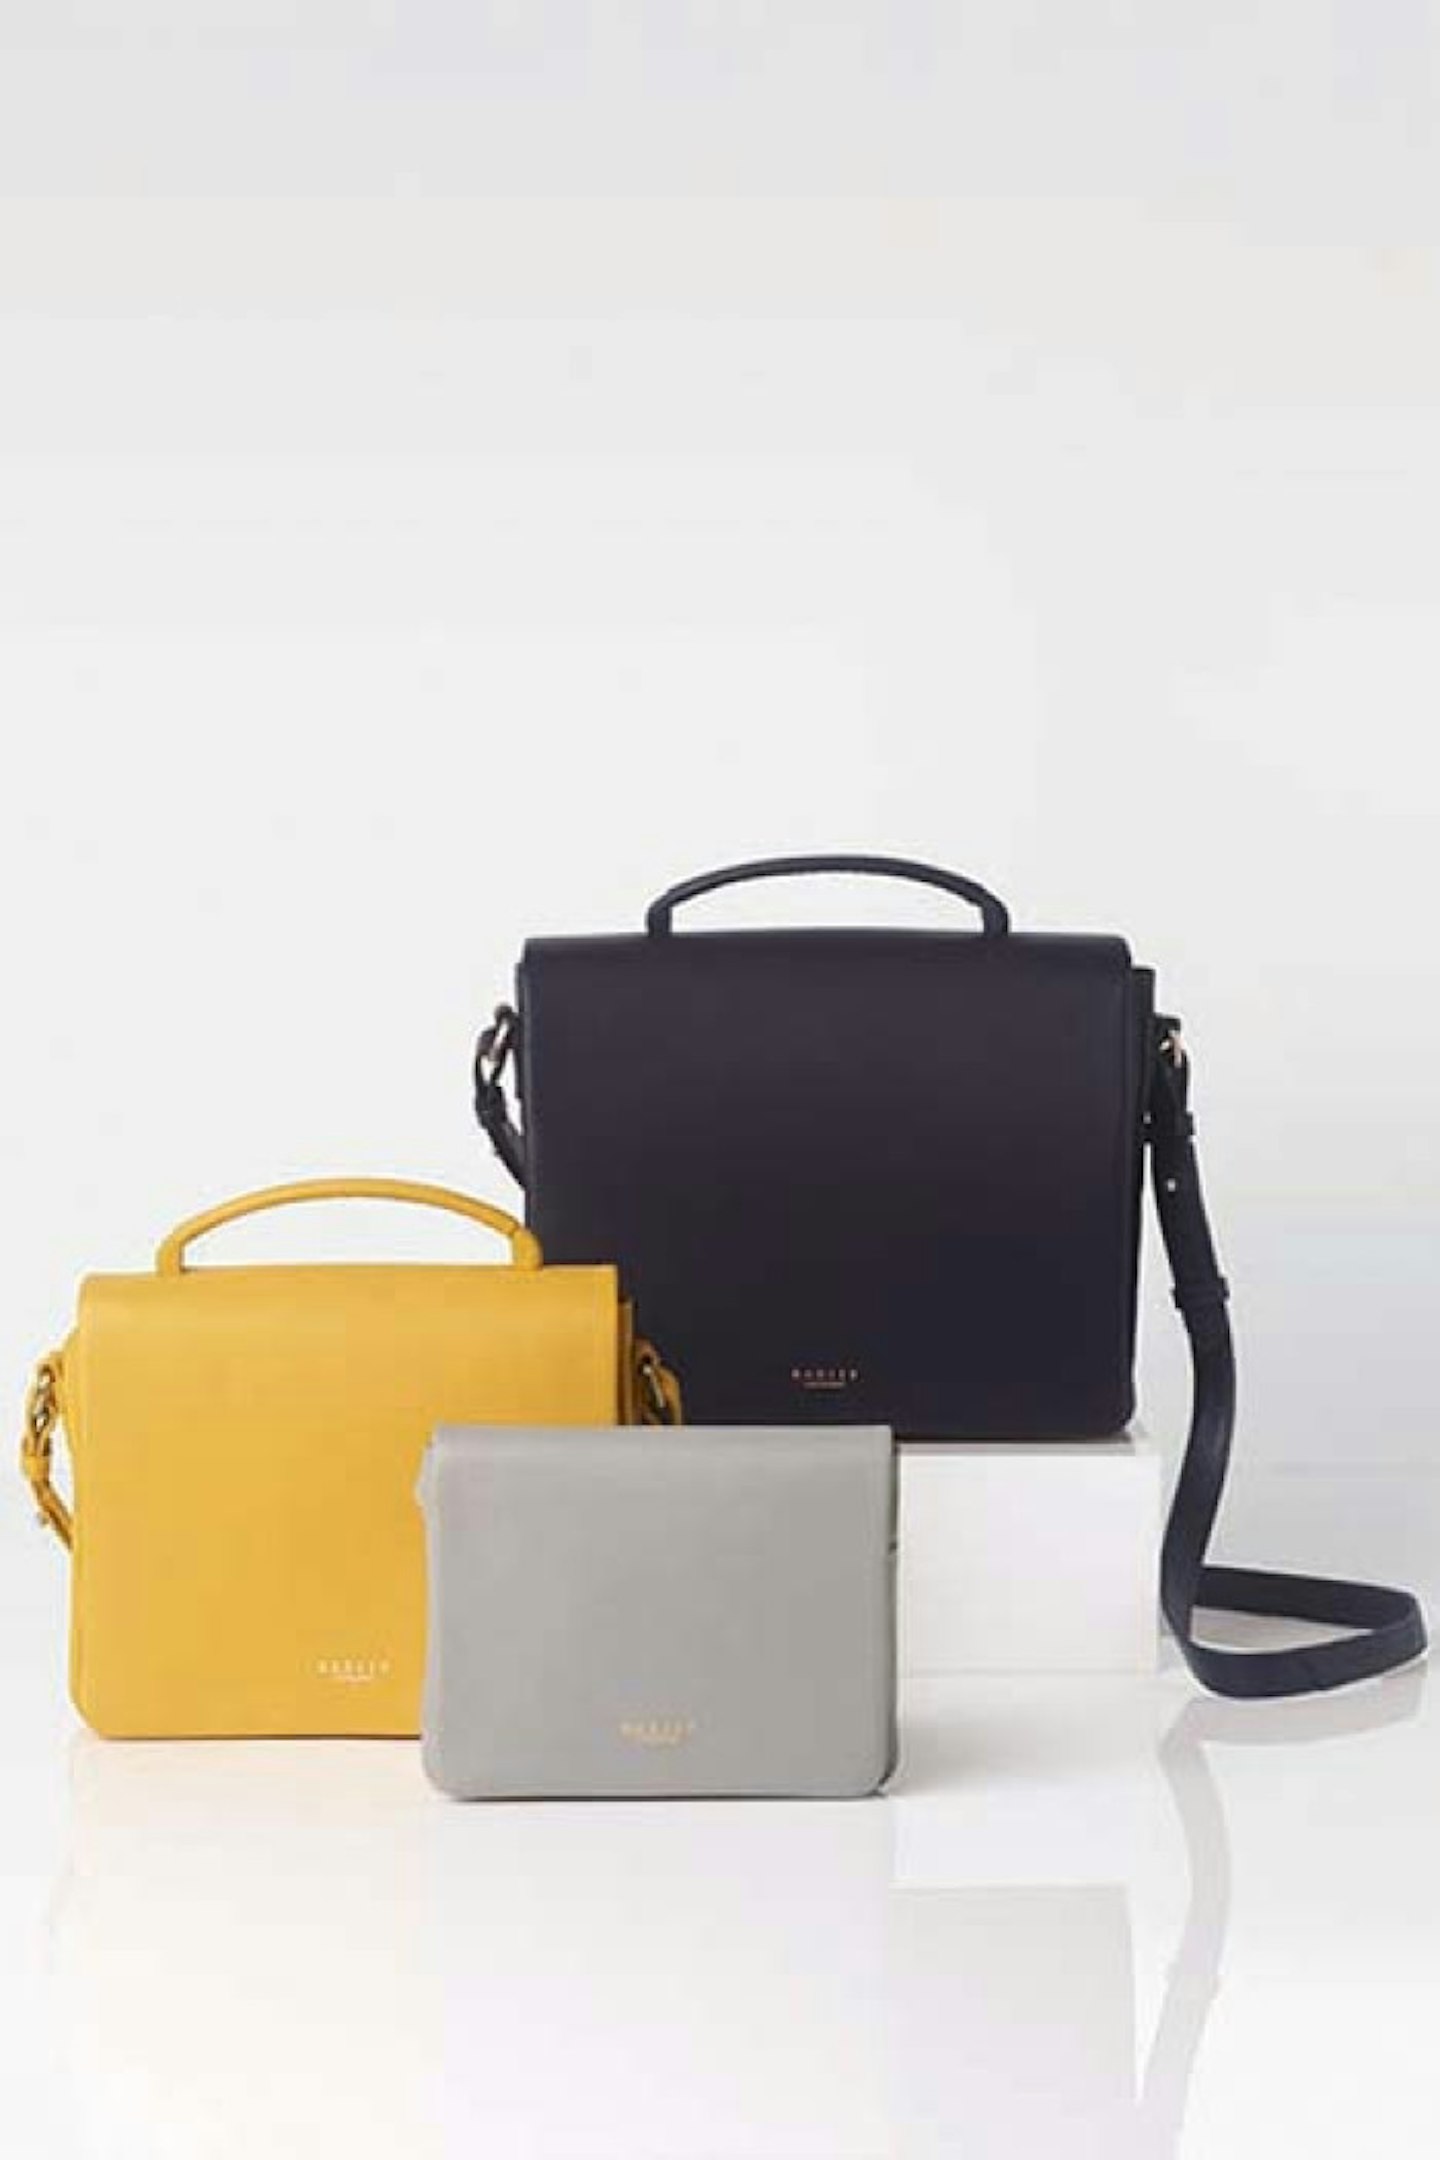 London Fields from the new Radley collection SS15.